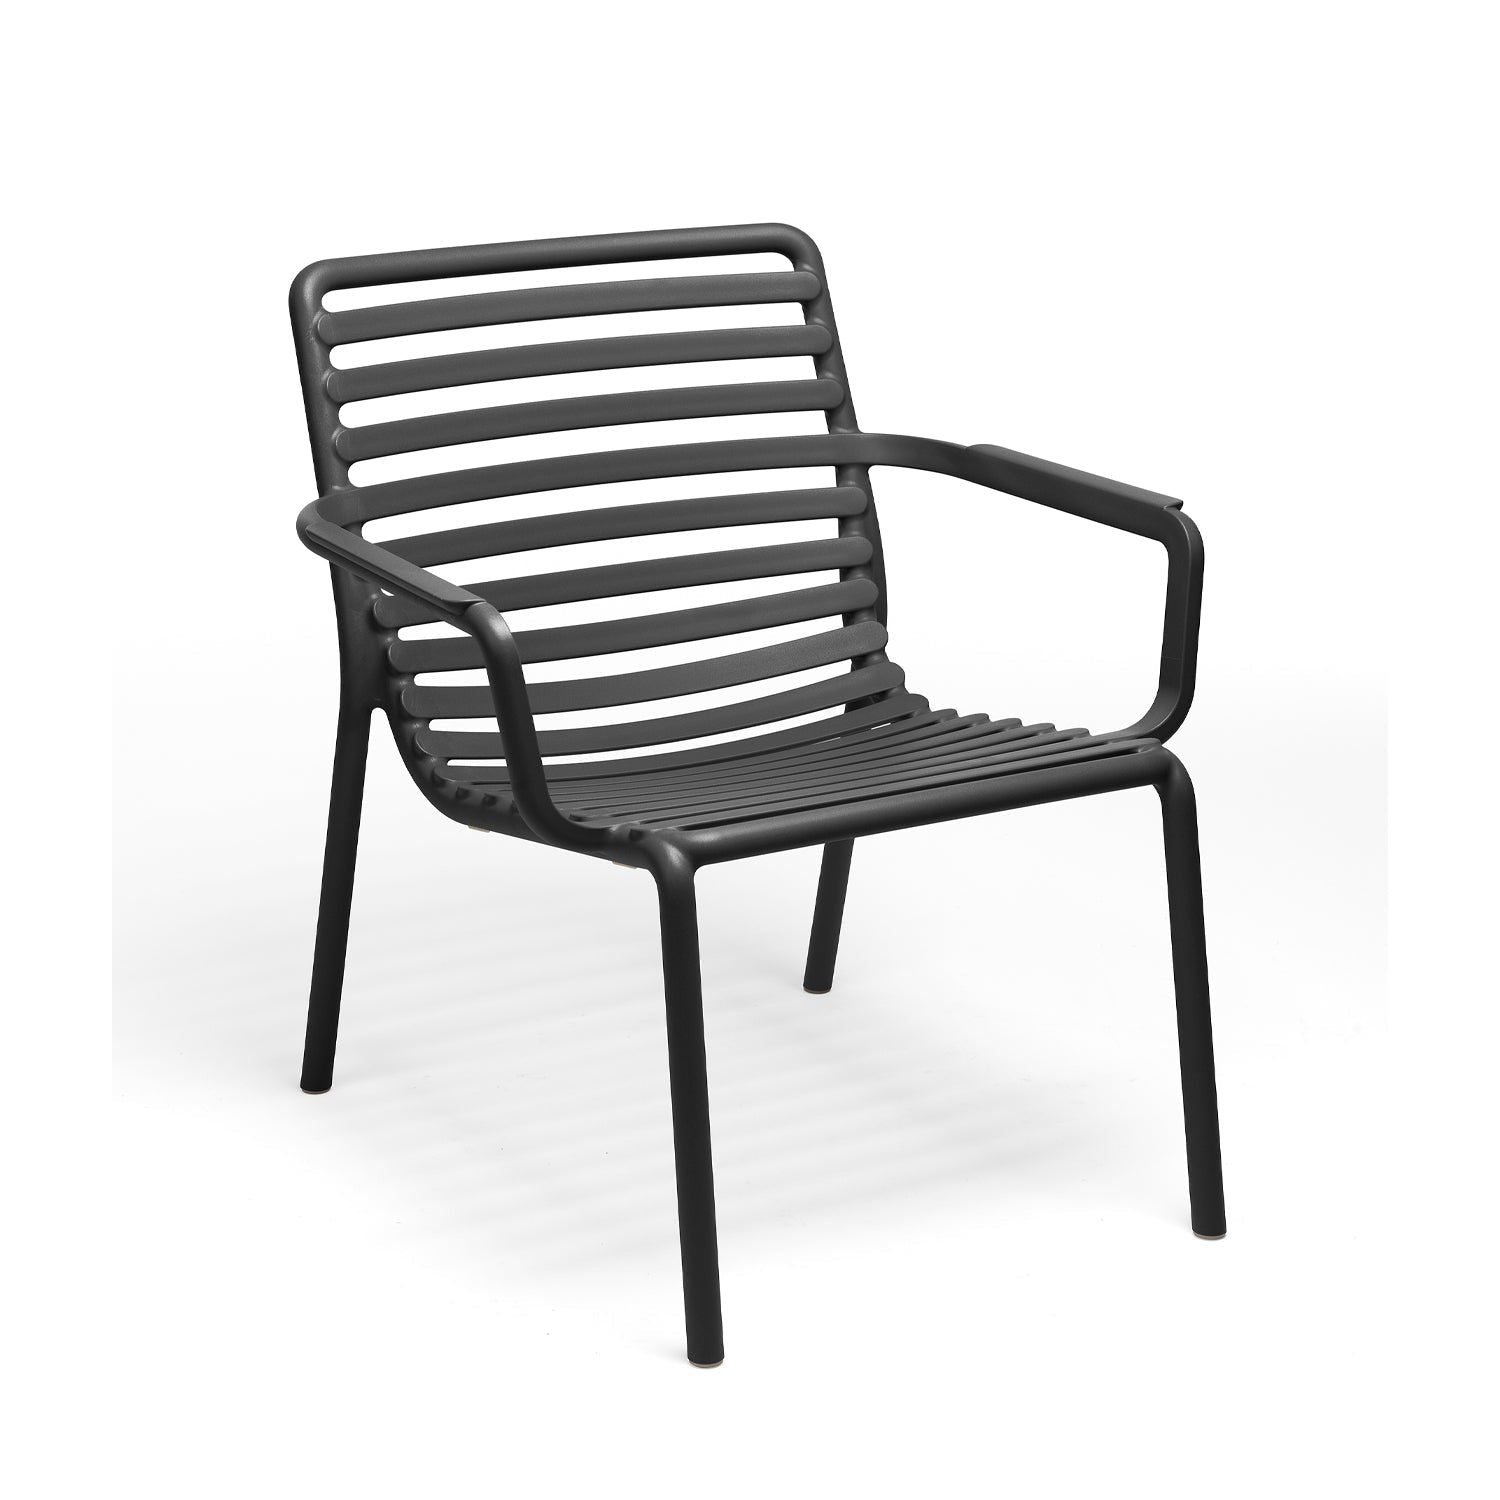 Doga Relax Garden Chair By Nardi In Anthracite